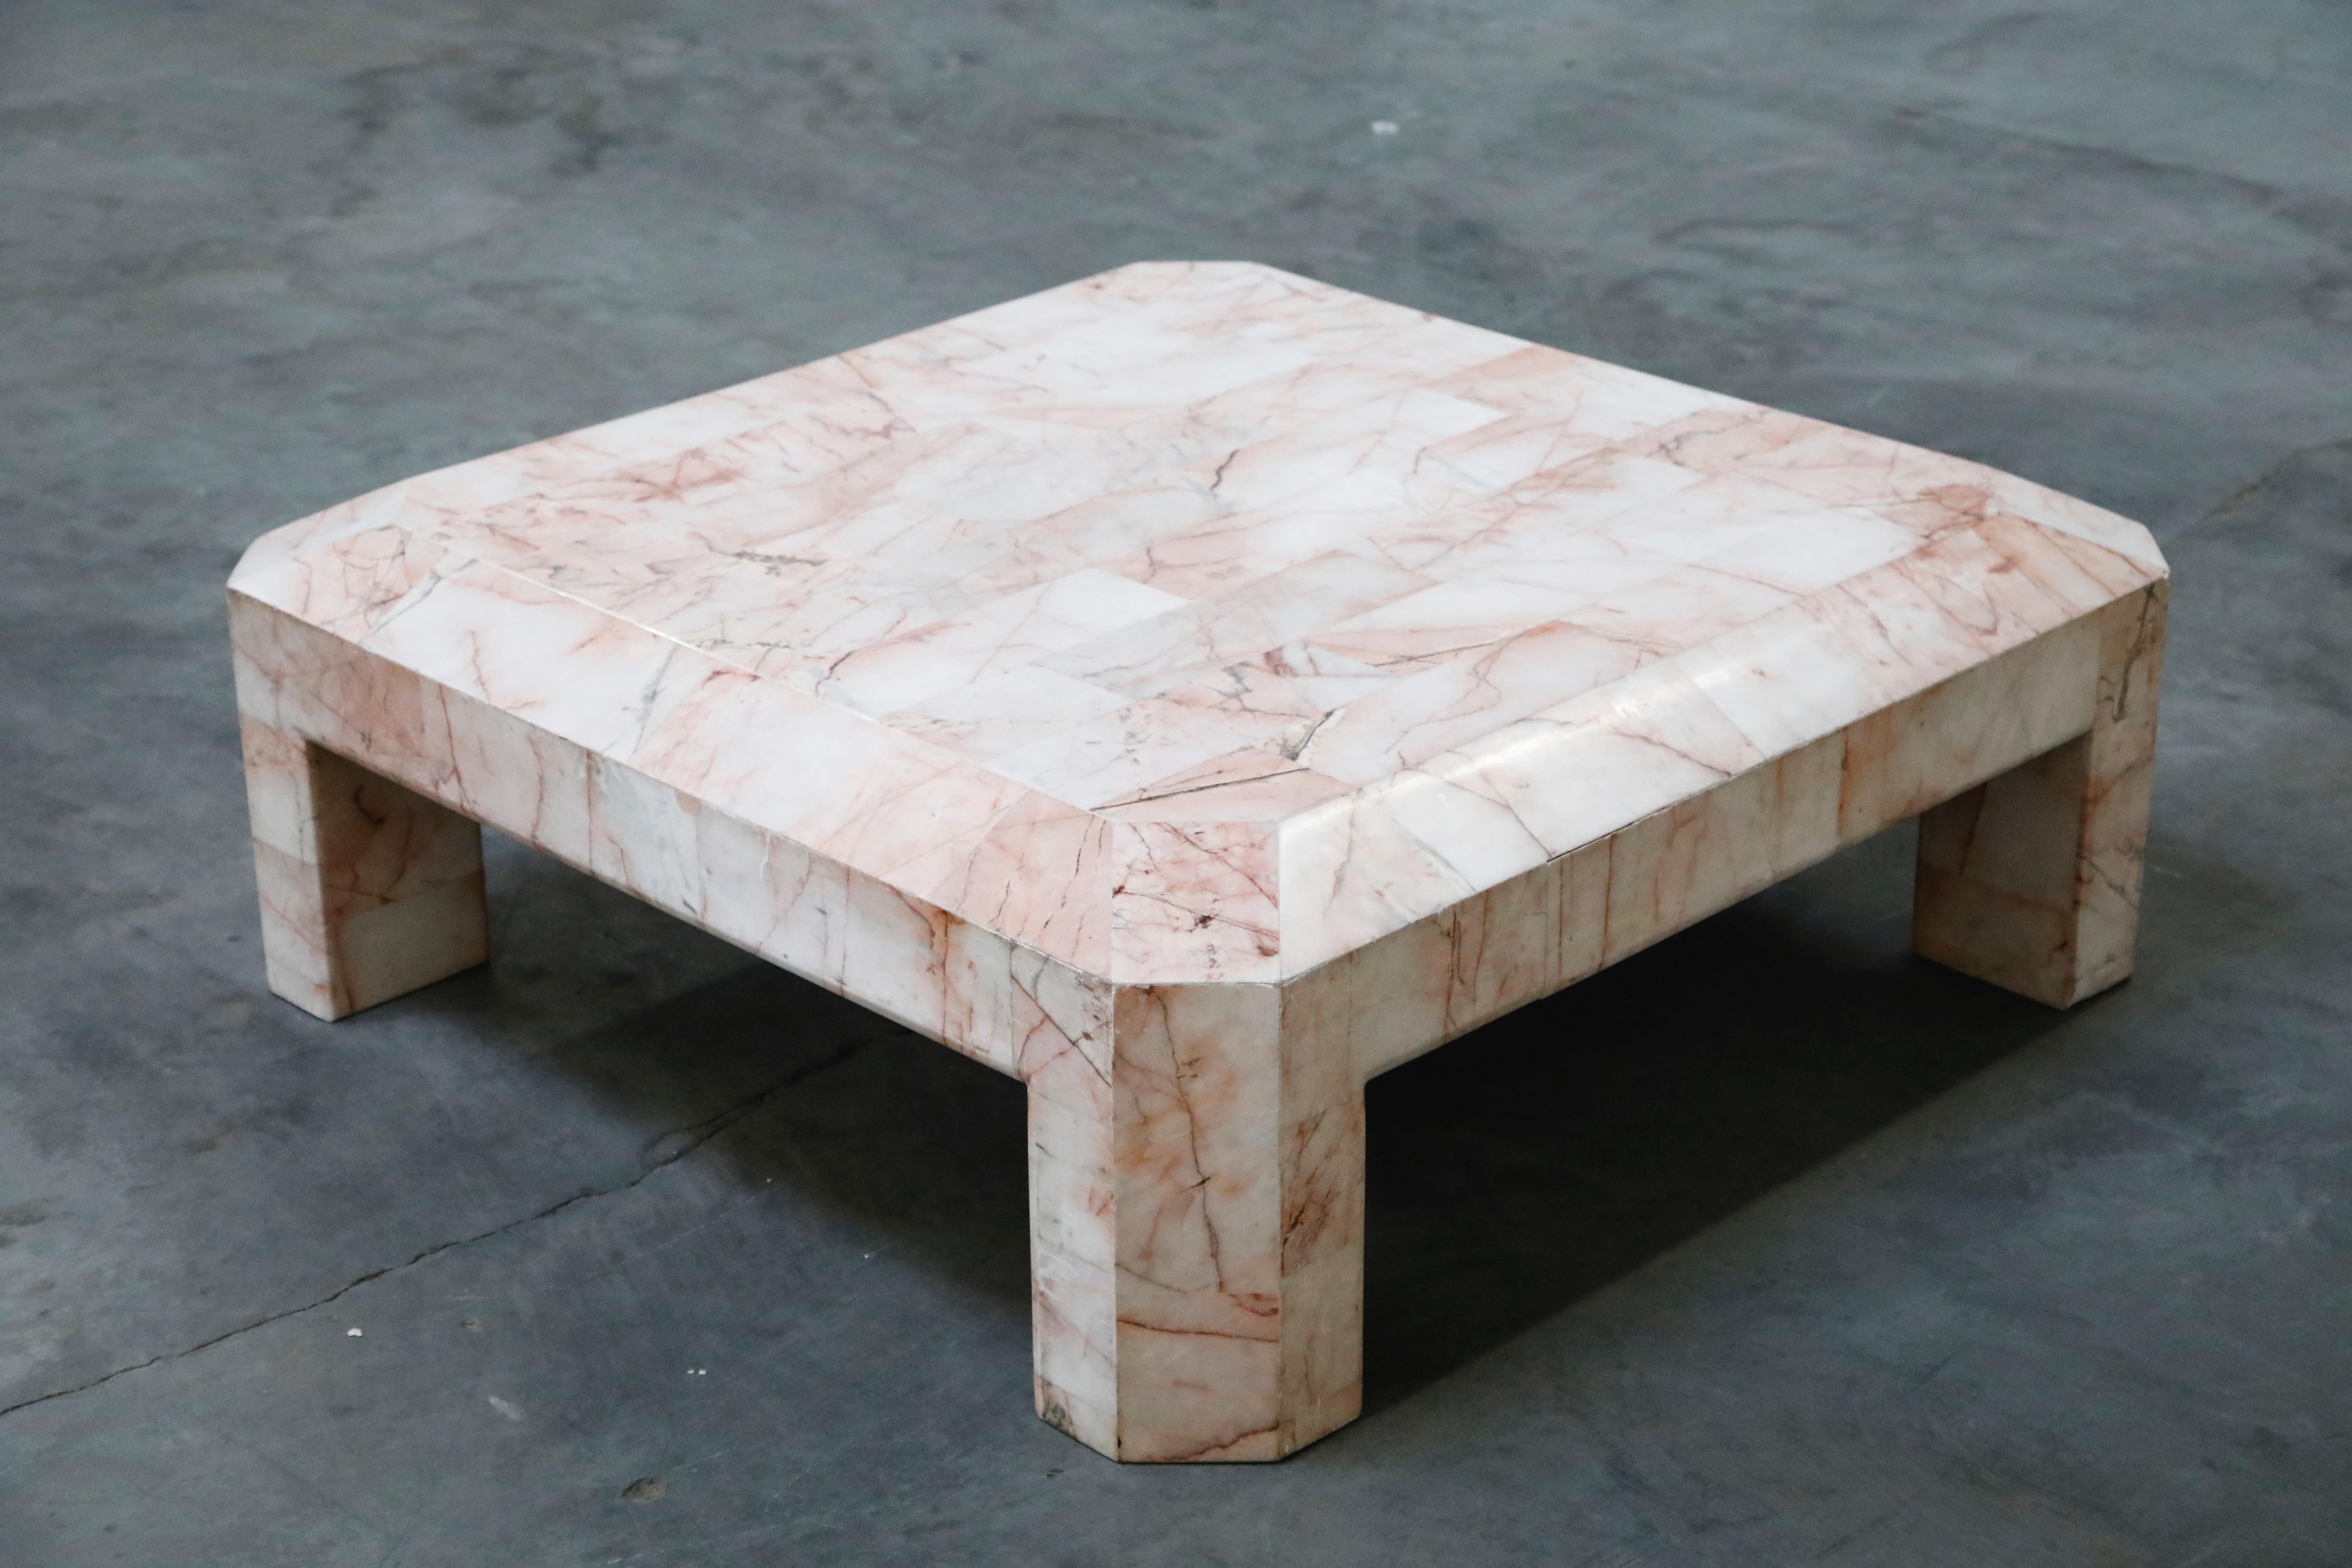 So gorgeous and designer on-trend, this heavy and substantial coffee table is constructed from tessellated pink onyx and even comes with a matching modern sculpture! The angled and architectural shape makes it perfect for a Postmodern room, while